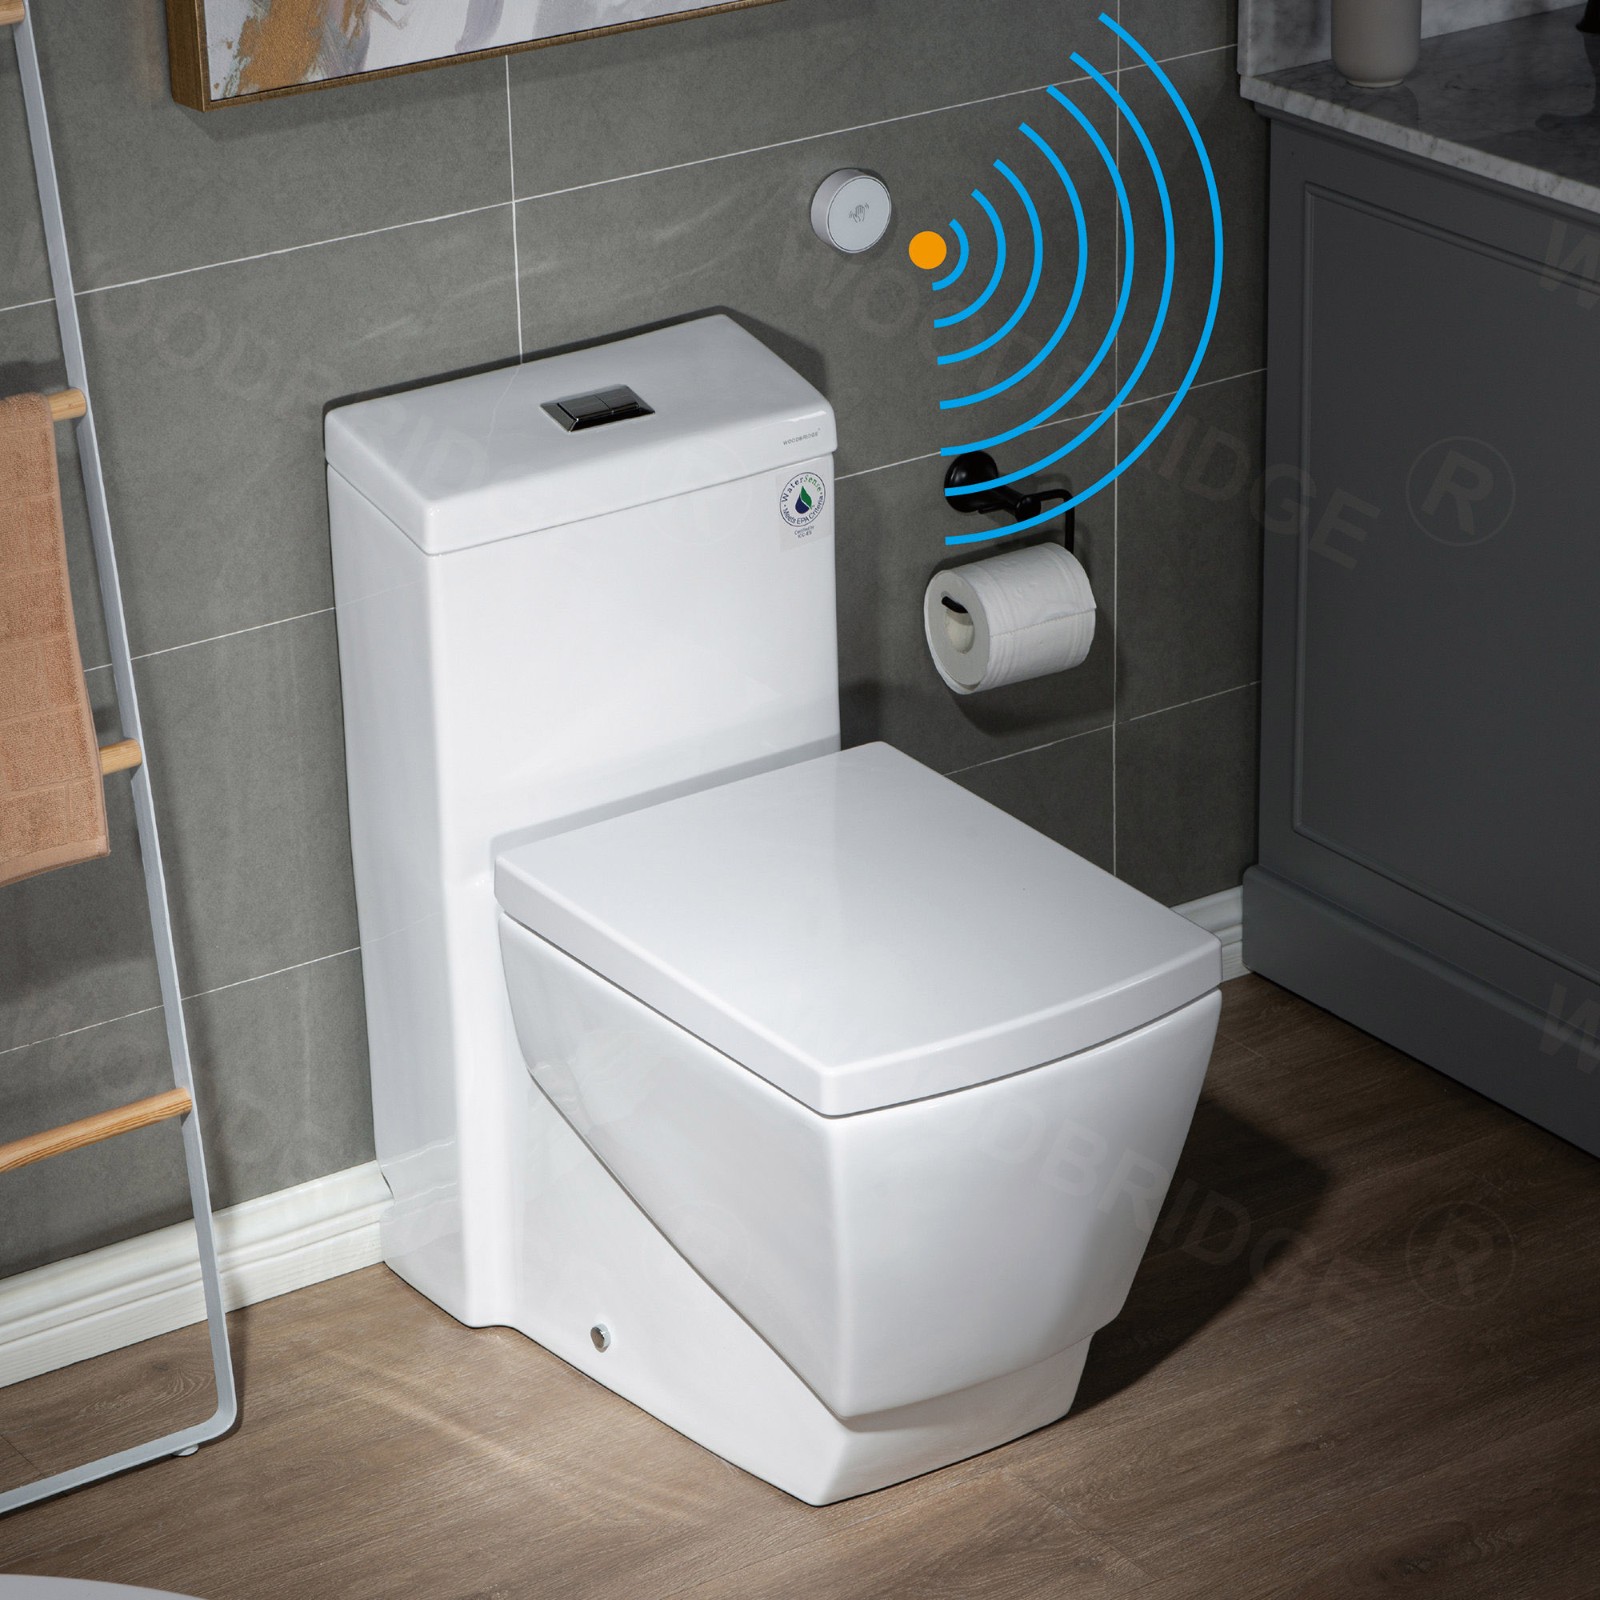  WOODBRIDGE B-0920-A Modern One-Piece Elongated Square toilet with Solf Closed Seat and Hand Free Touchless Sensor Flush Kit, White_5448